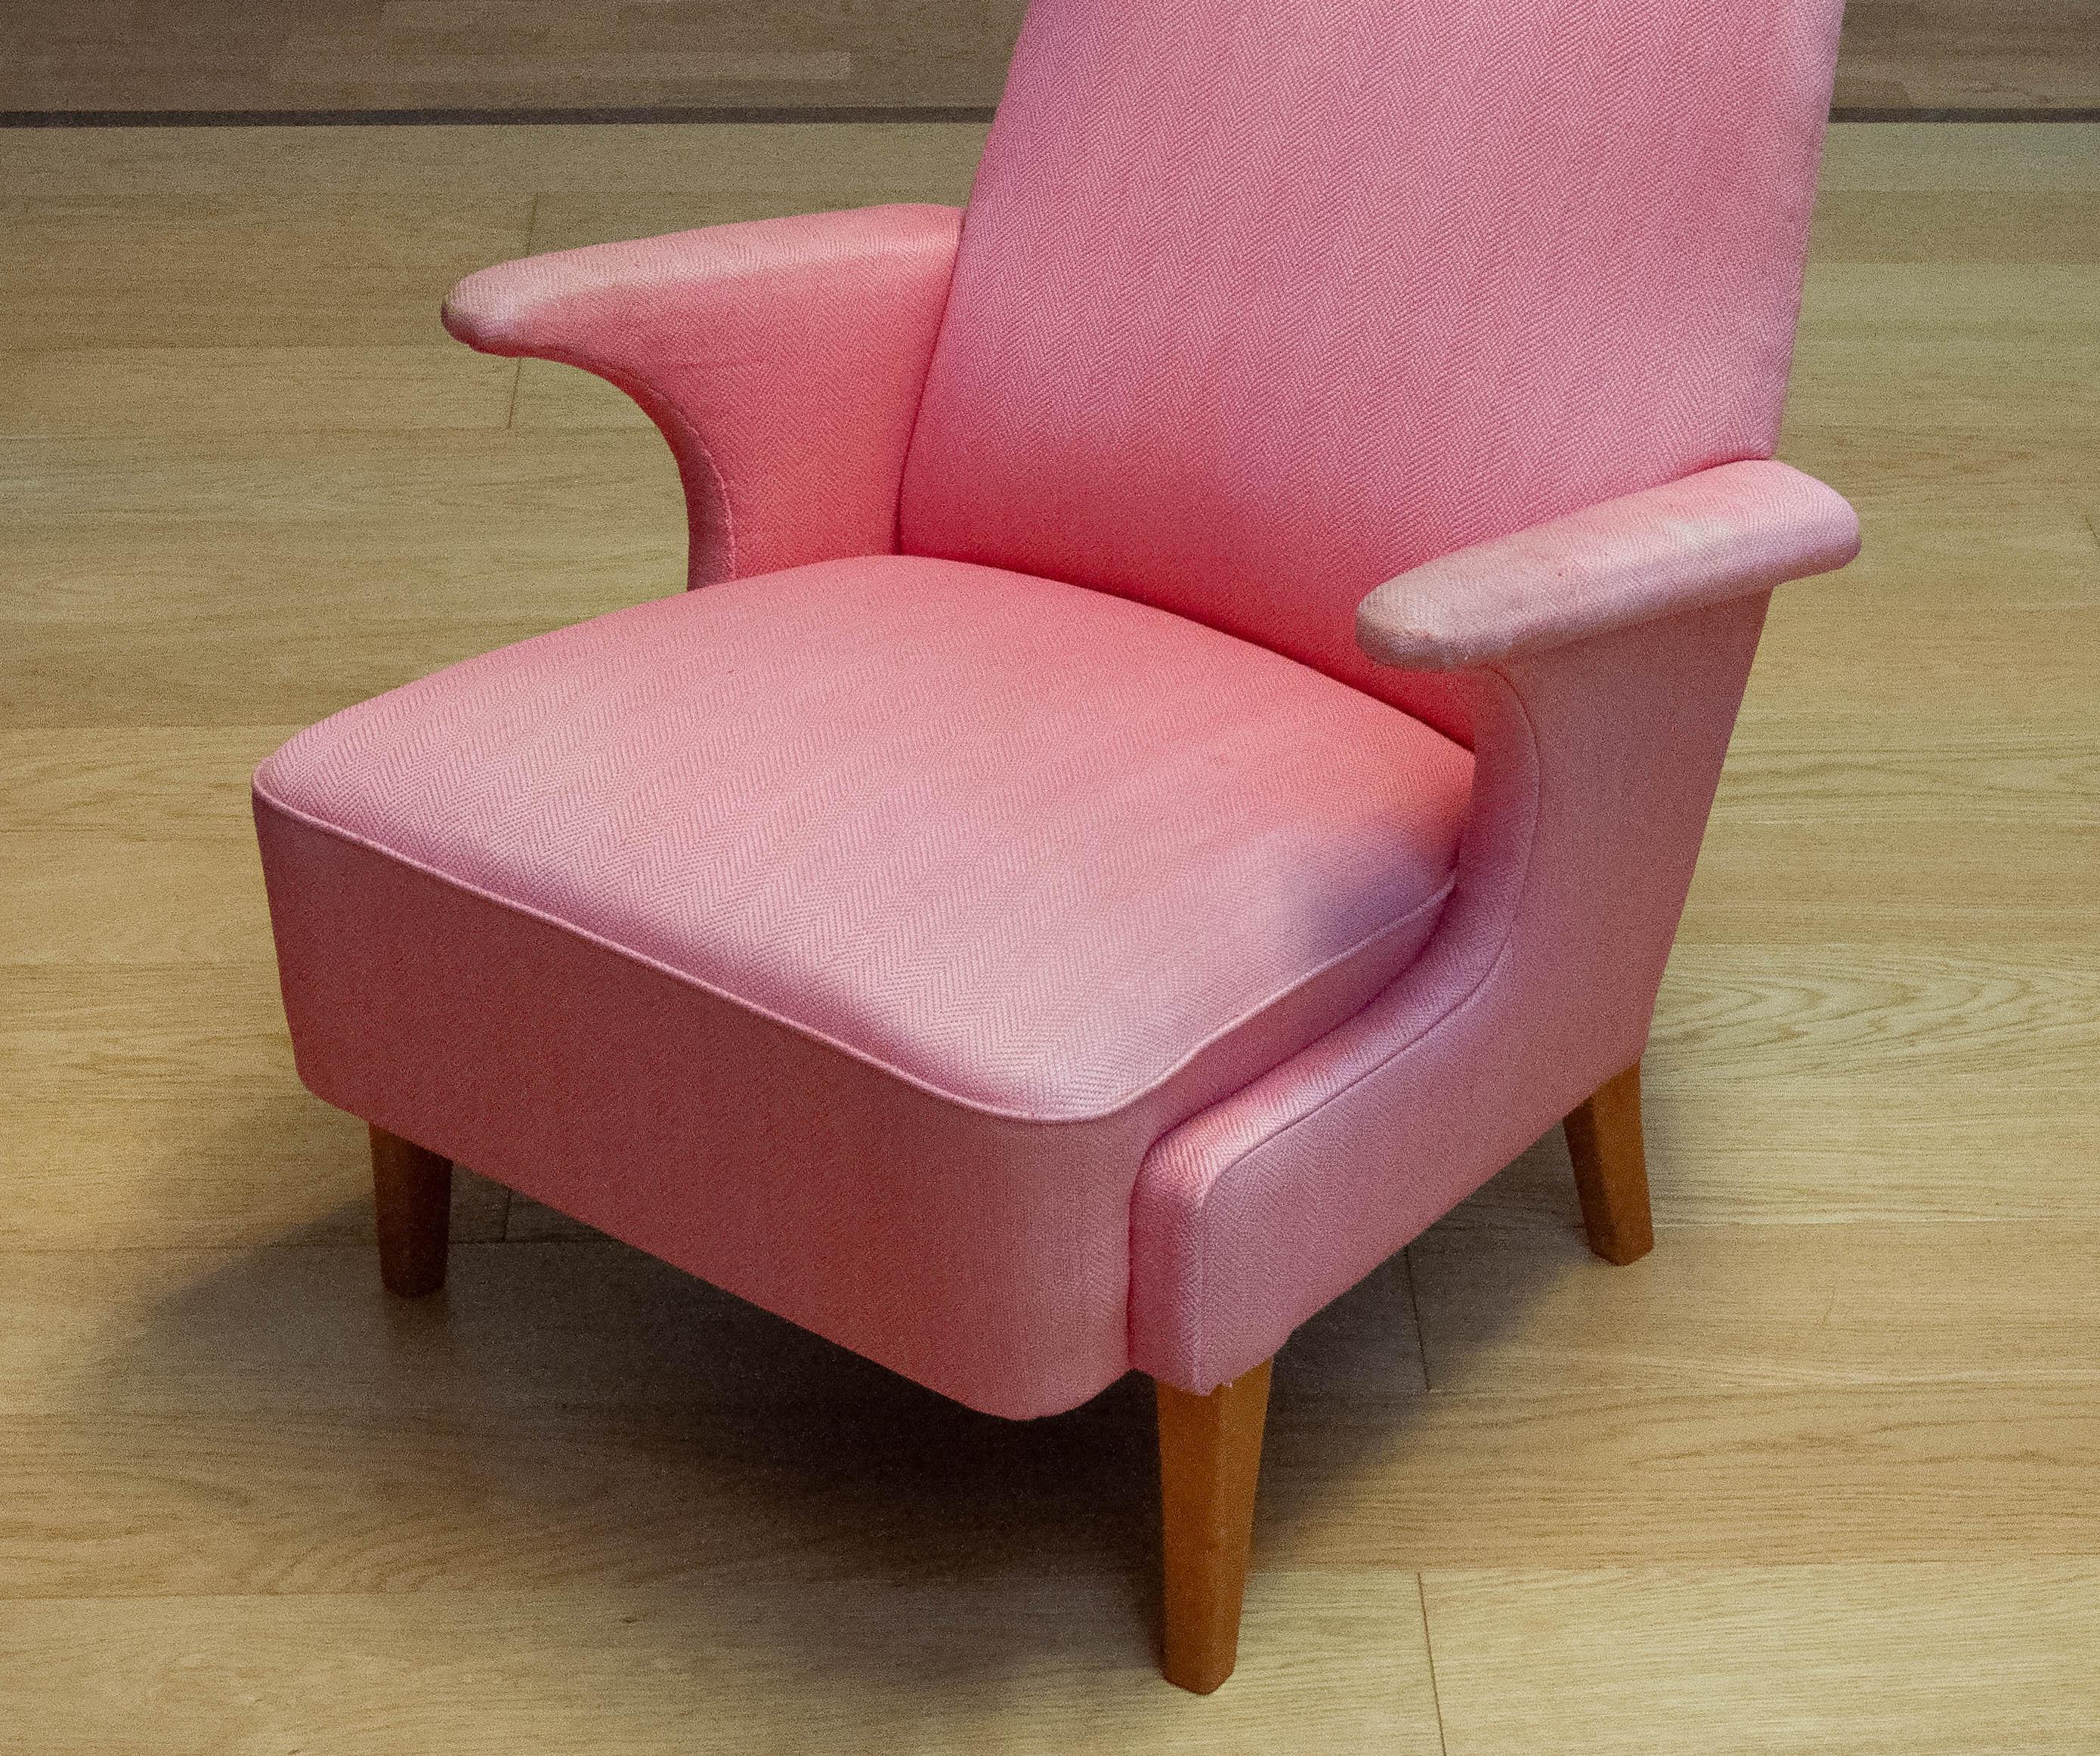 1950 Armchair / Lounge Chair With Powder Pink Wool Upholstery By Dux From Sweden For Sale 4